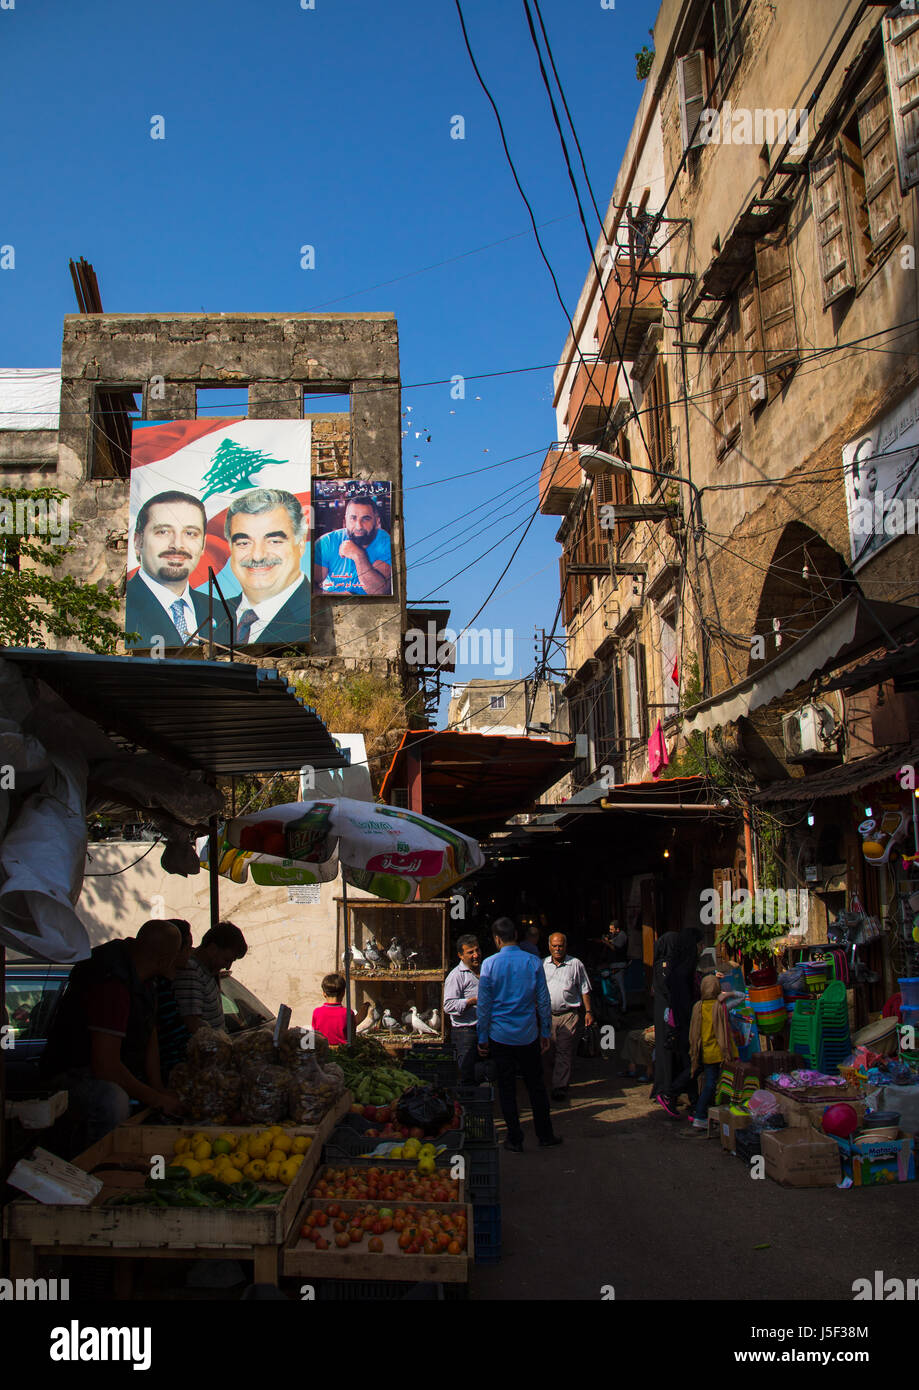 Hariri family posters at the entrance of the old souk, North Governorate, Tripoli, Lebanon Stock Photo